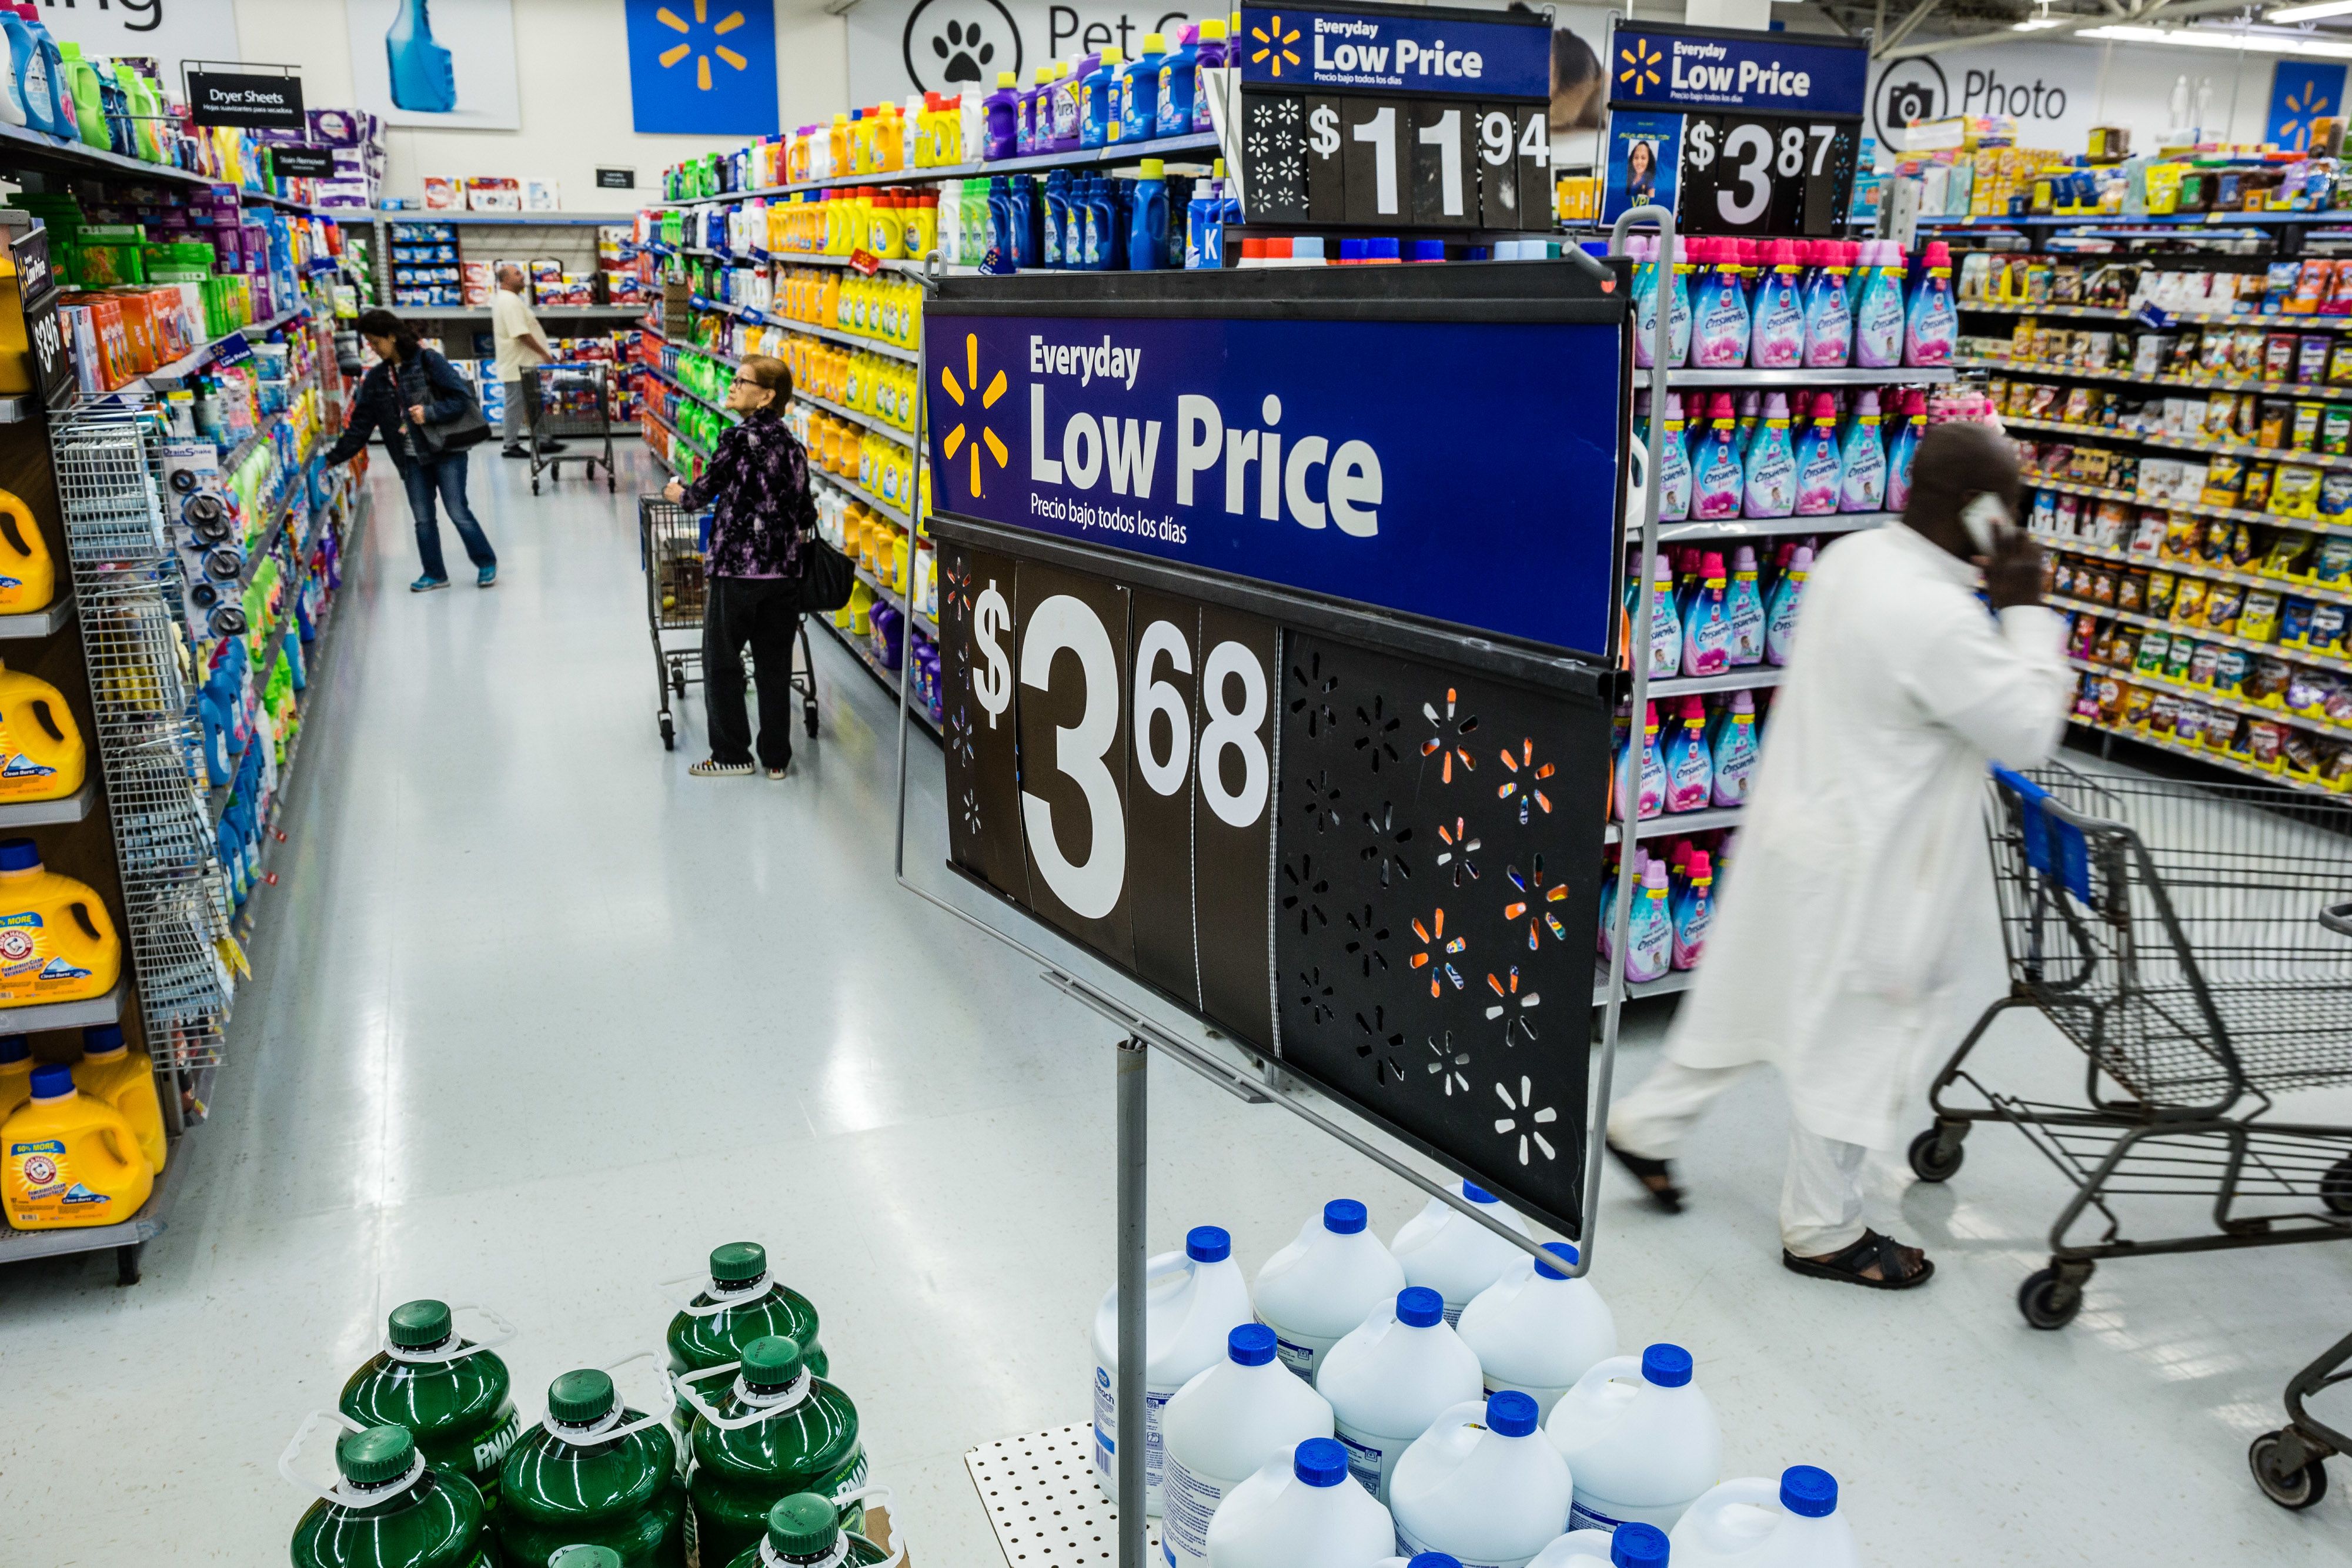 Walmart reports first quarter earnings for fiscal 2020